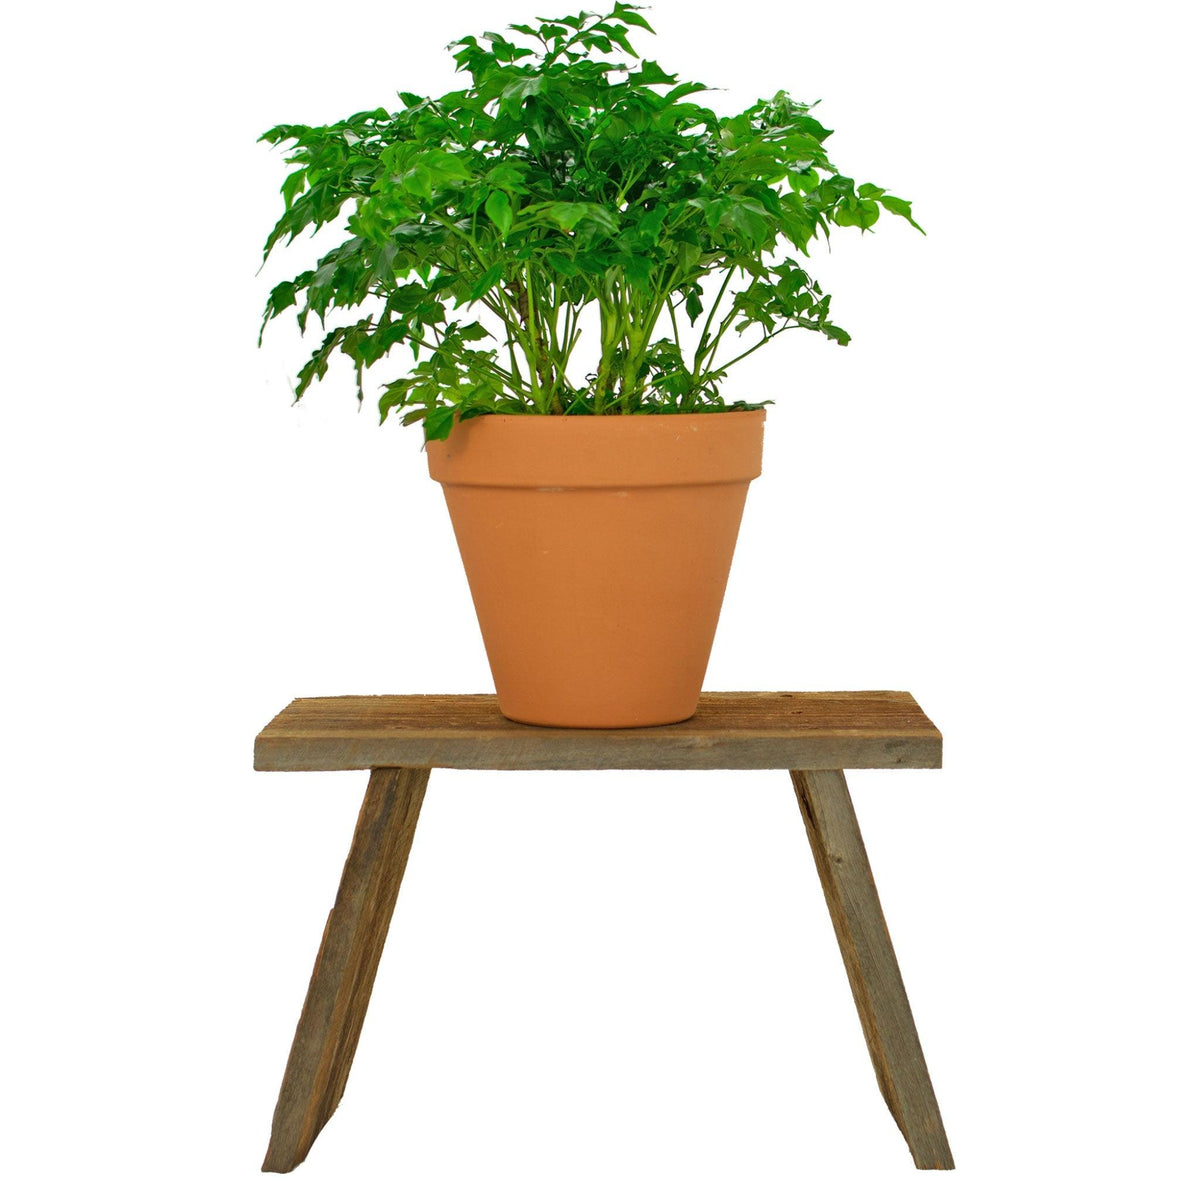 Lee Display's Rustic Redwood Build-Up End Table on display with a potted plant.  On sale at leedisplay.com